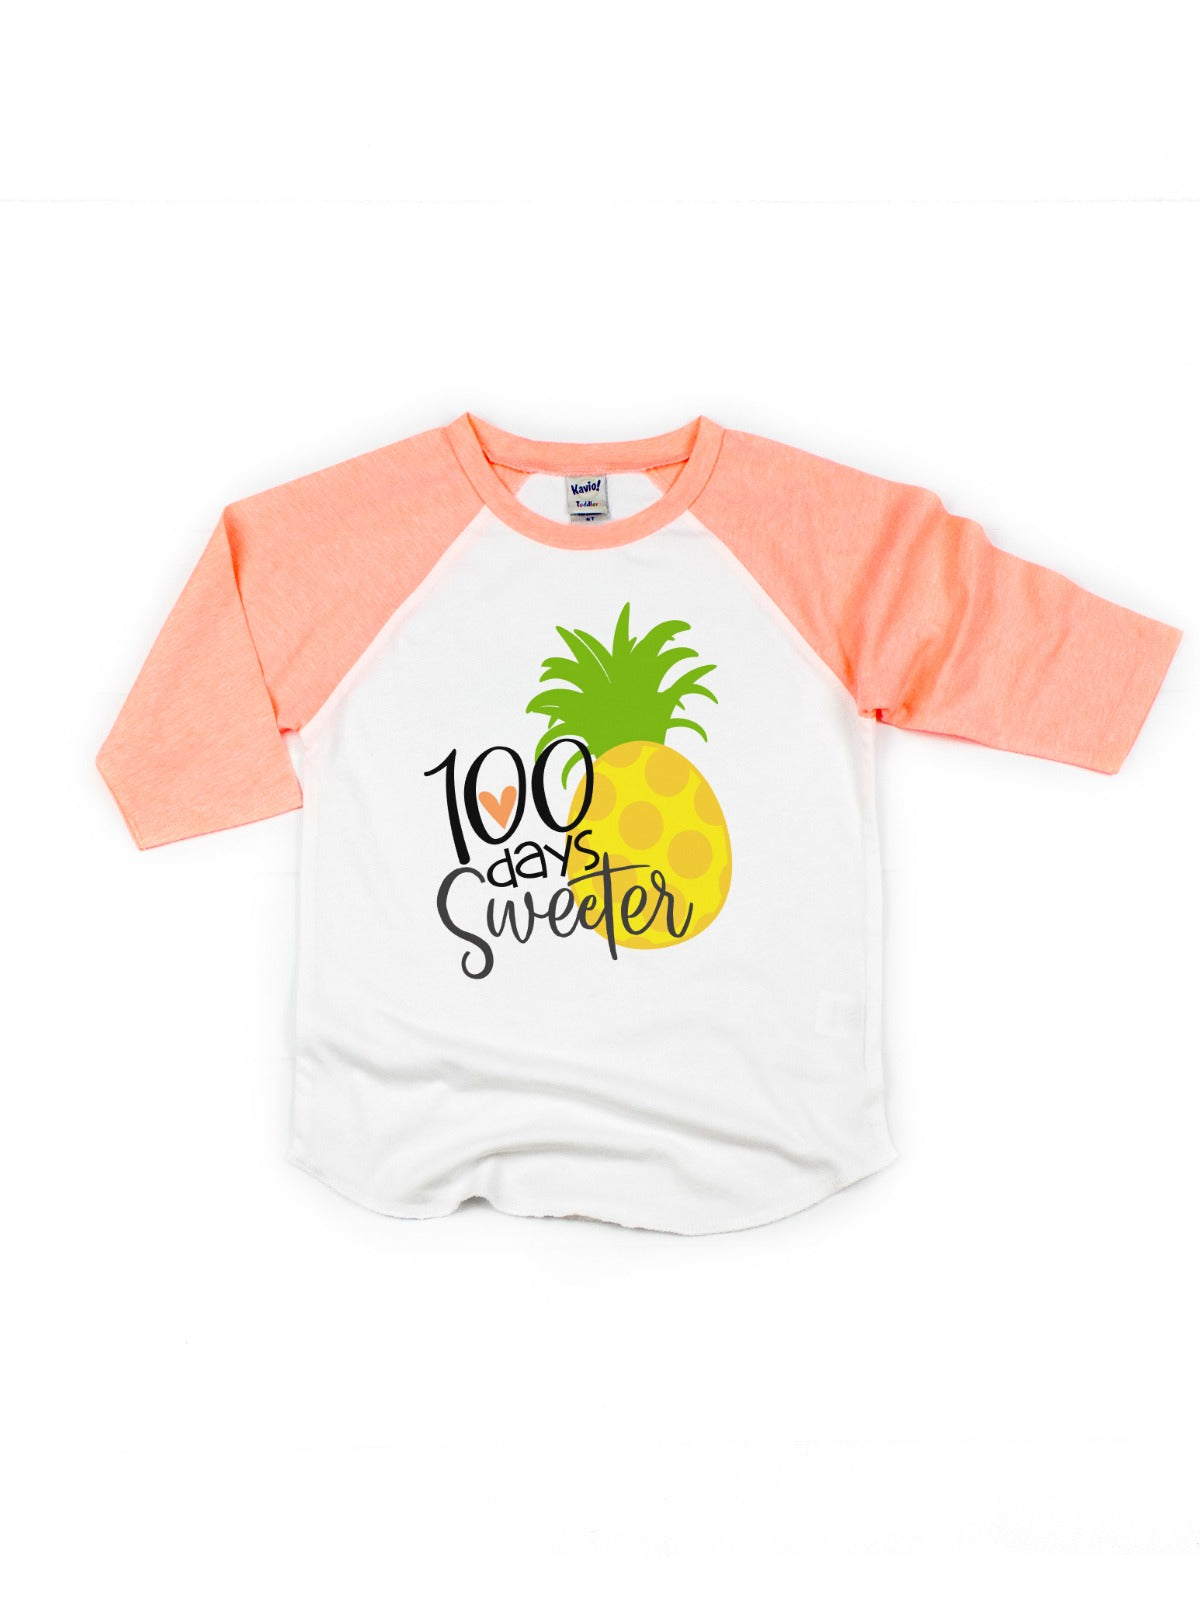 100 days sweeter pineapple 100th day of school shirt for girls